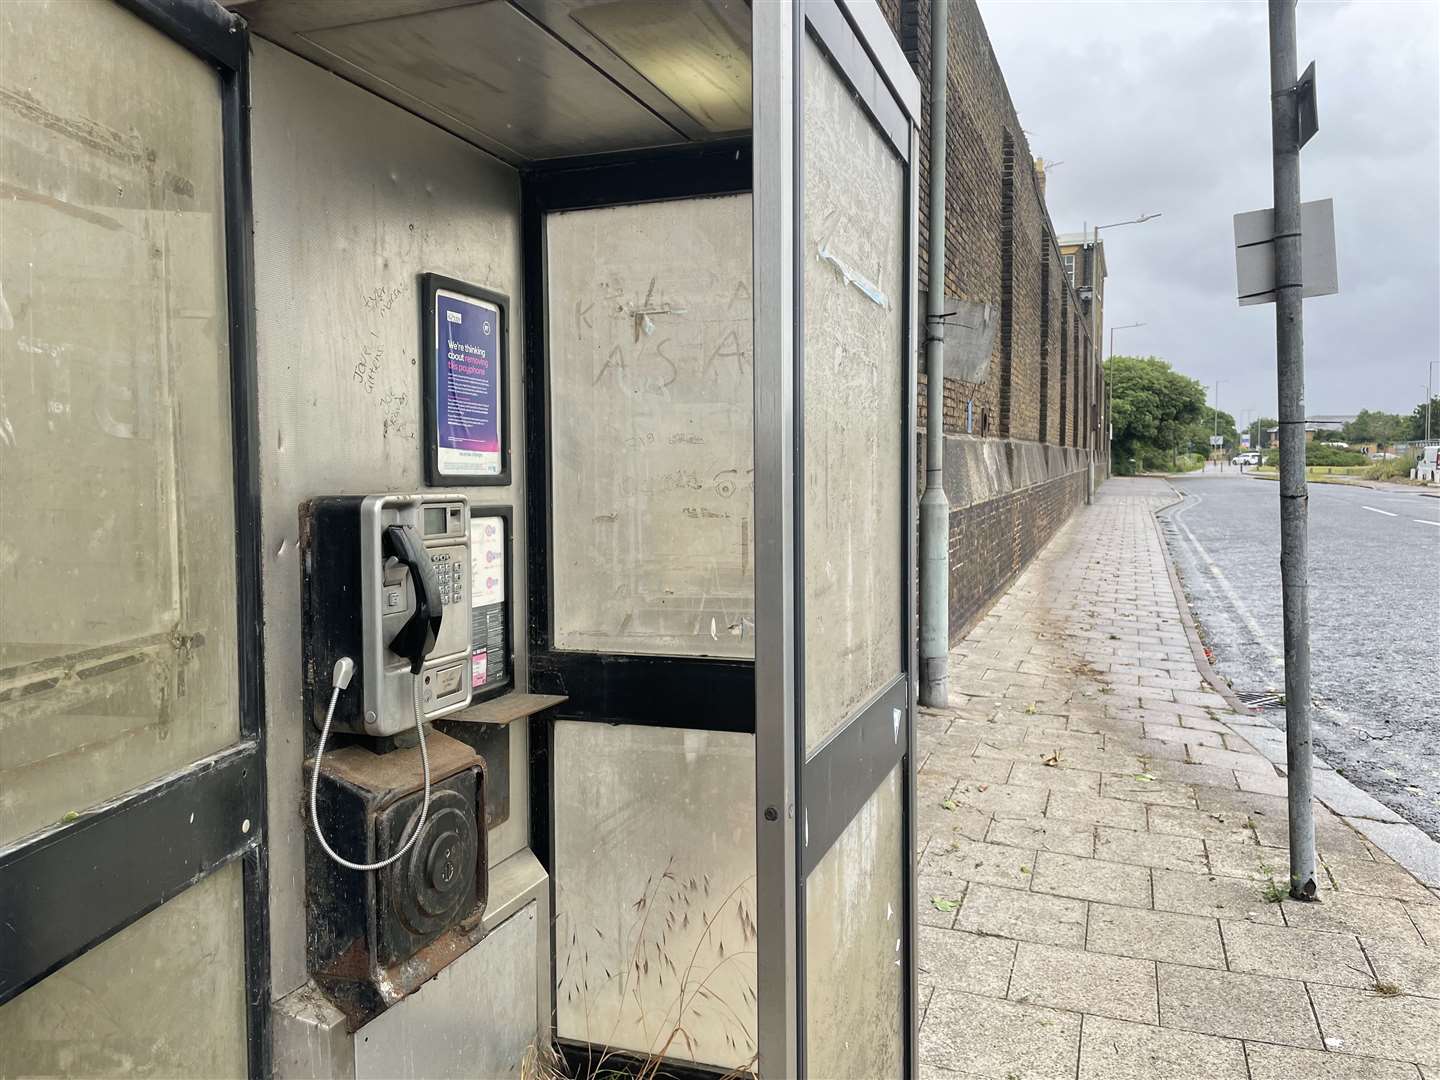 The BT payphone in Blue Town has weathered windows and is covered in graffiti